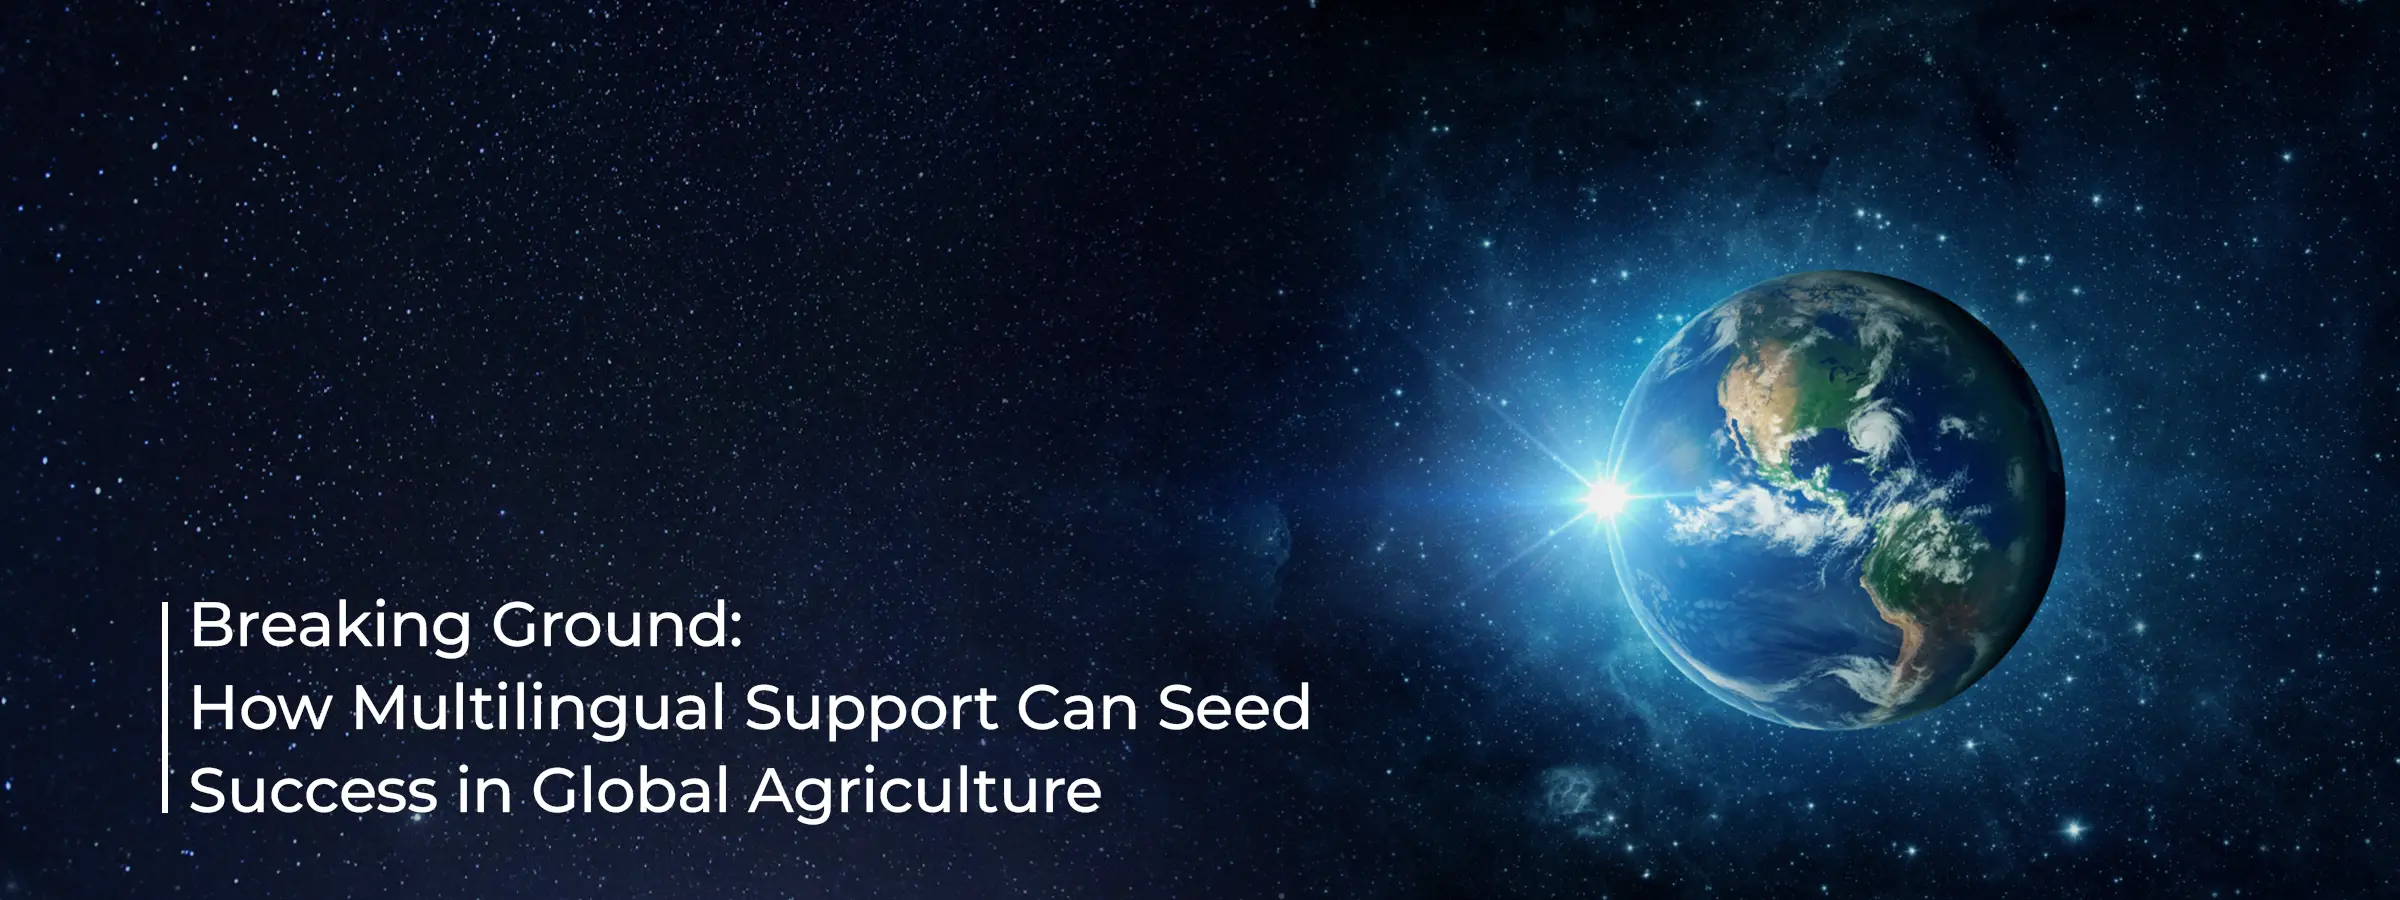 multilingual-support-can-seed-success-in-global-agriculture